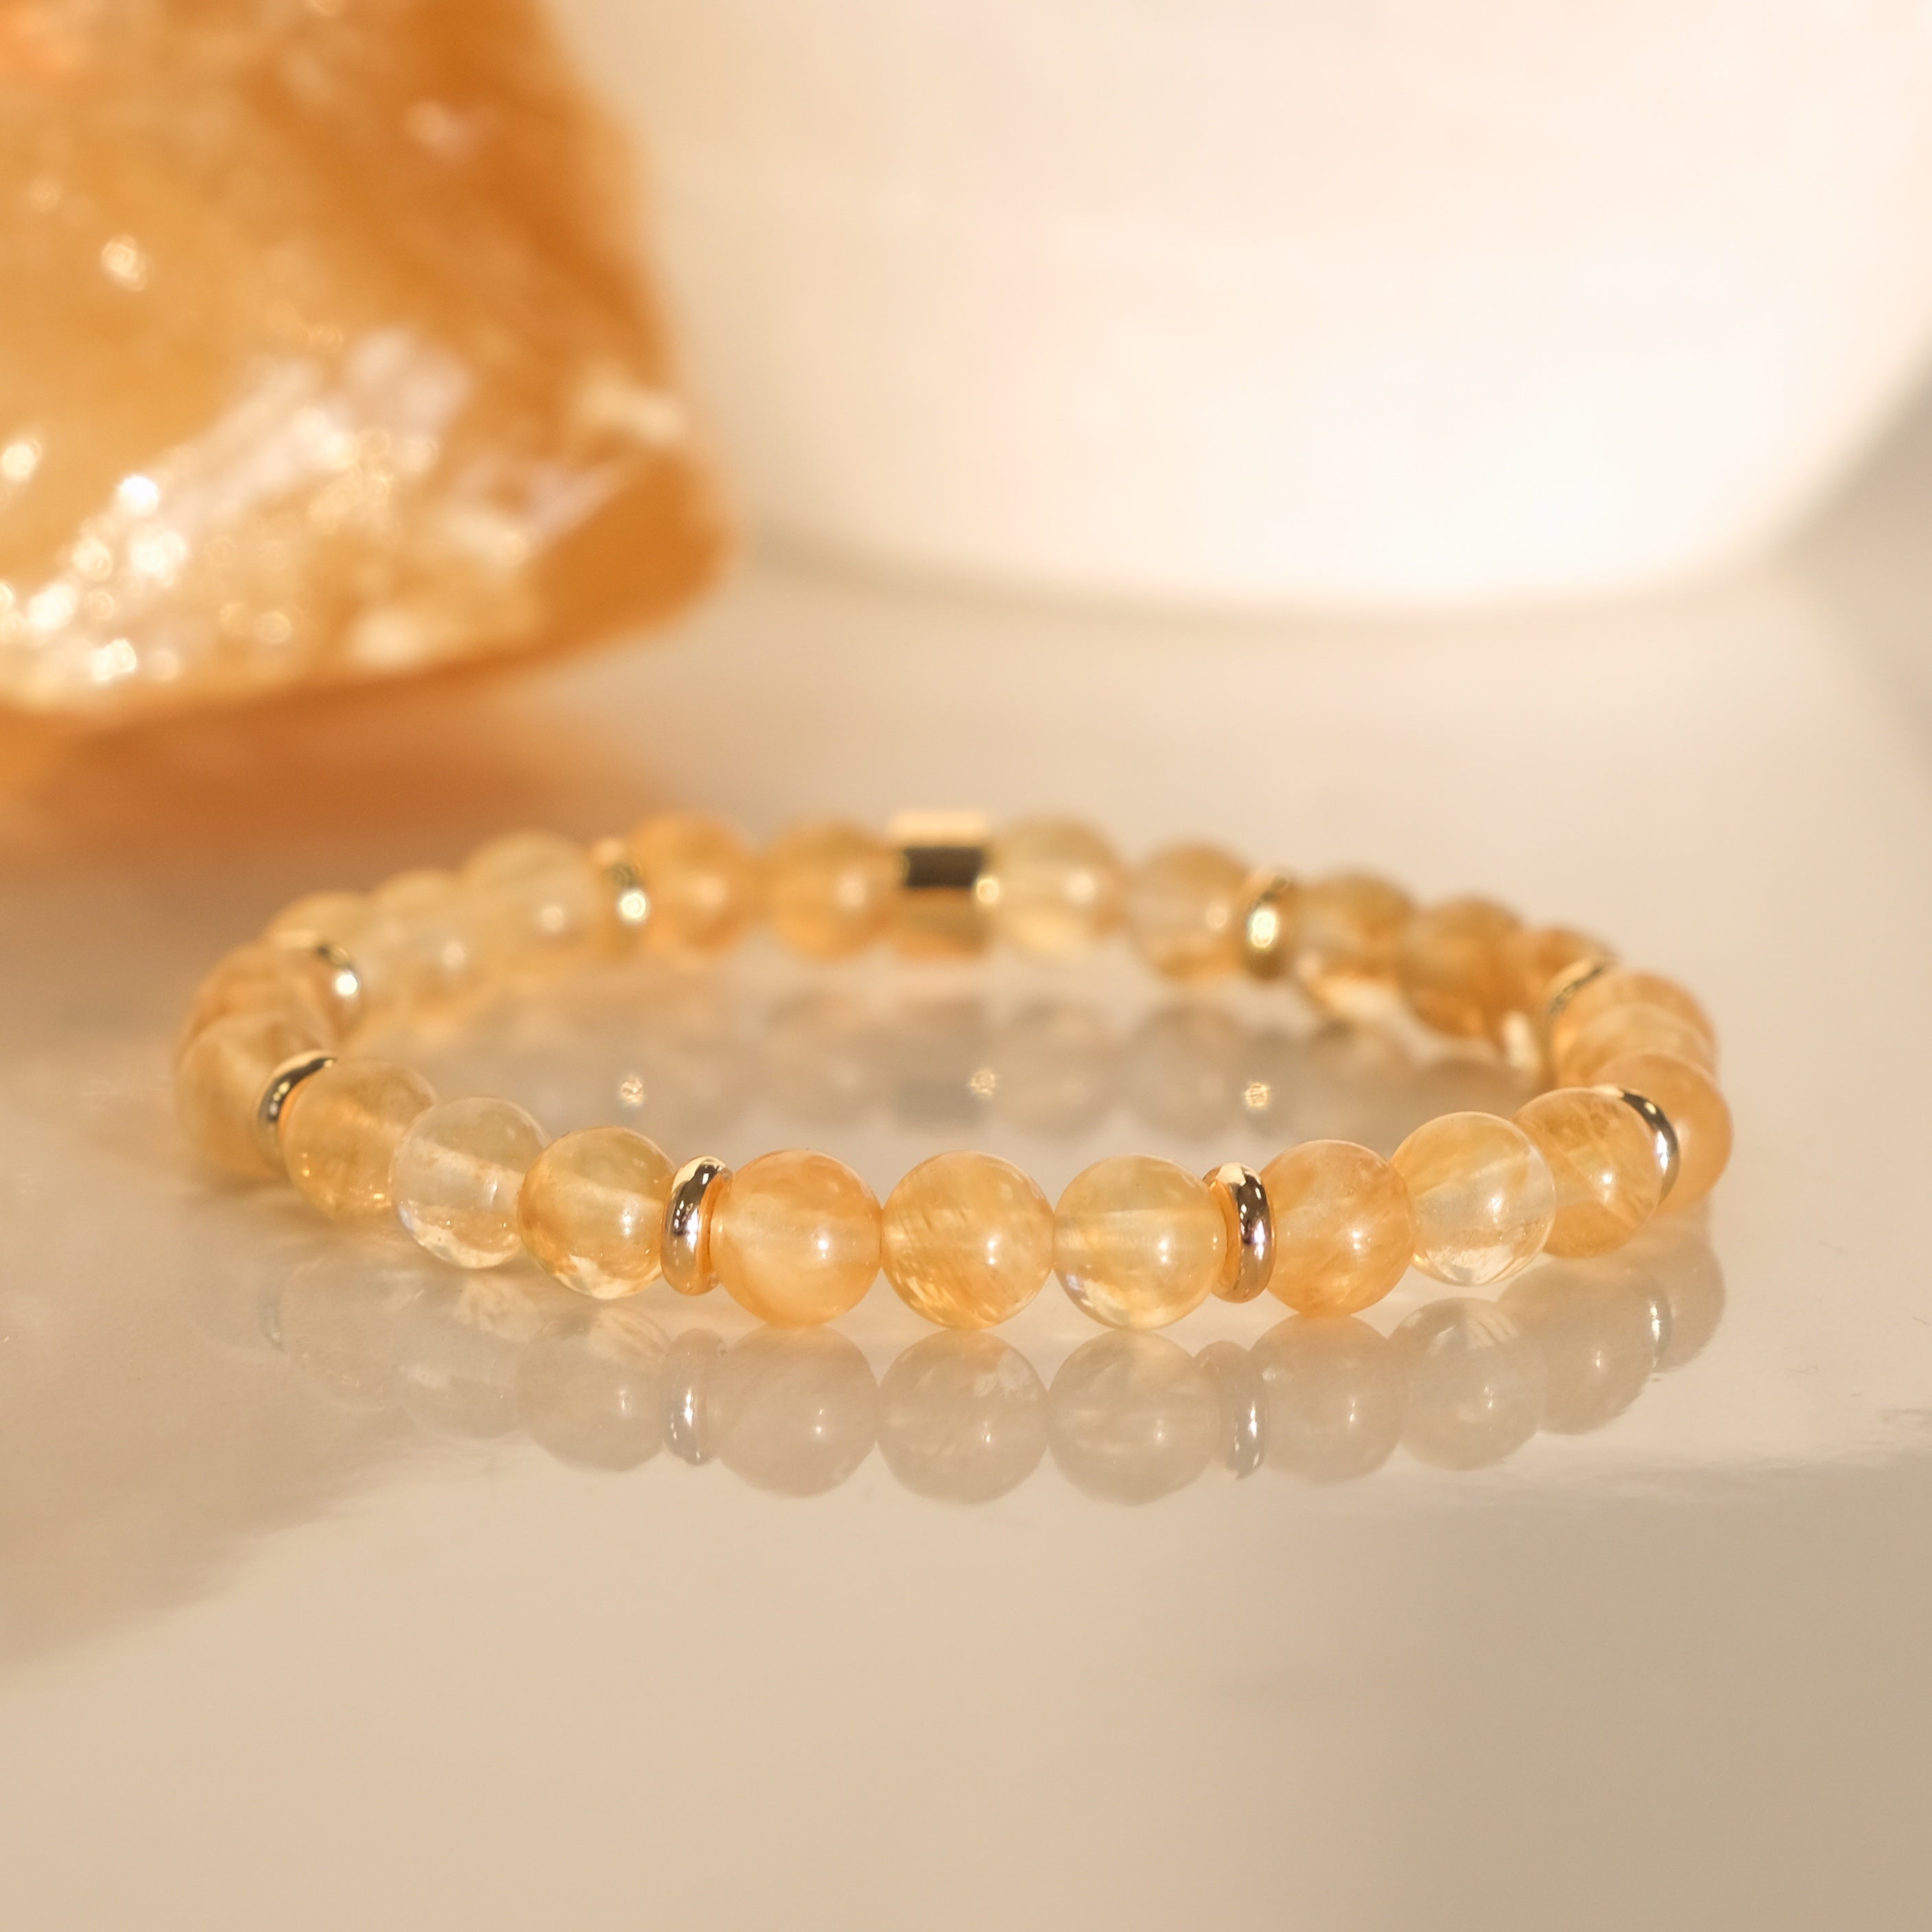 A golden healer quartz bracelet in 6mm with gold plated accessories